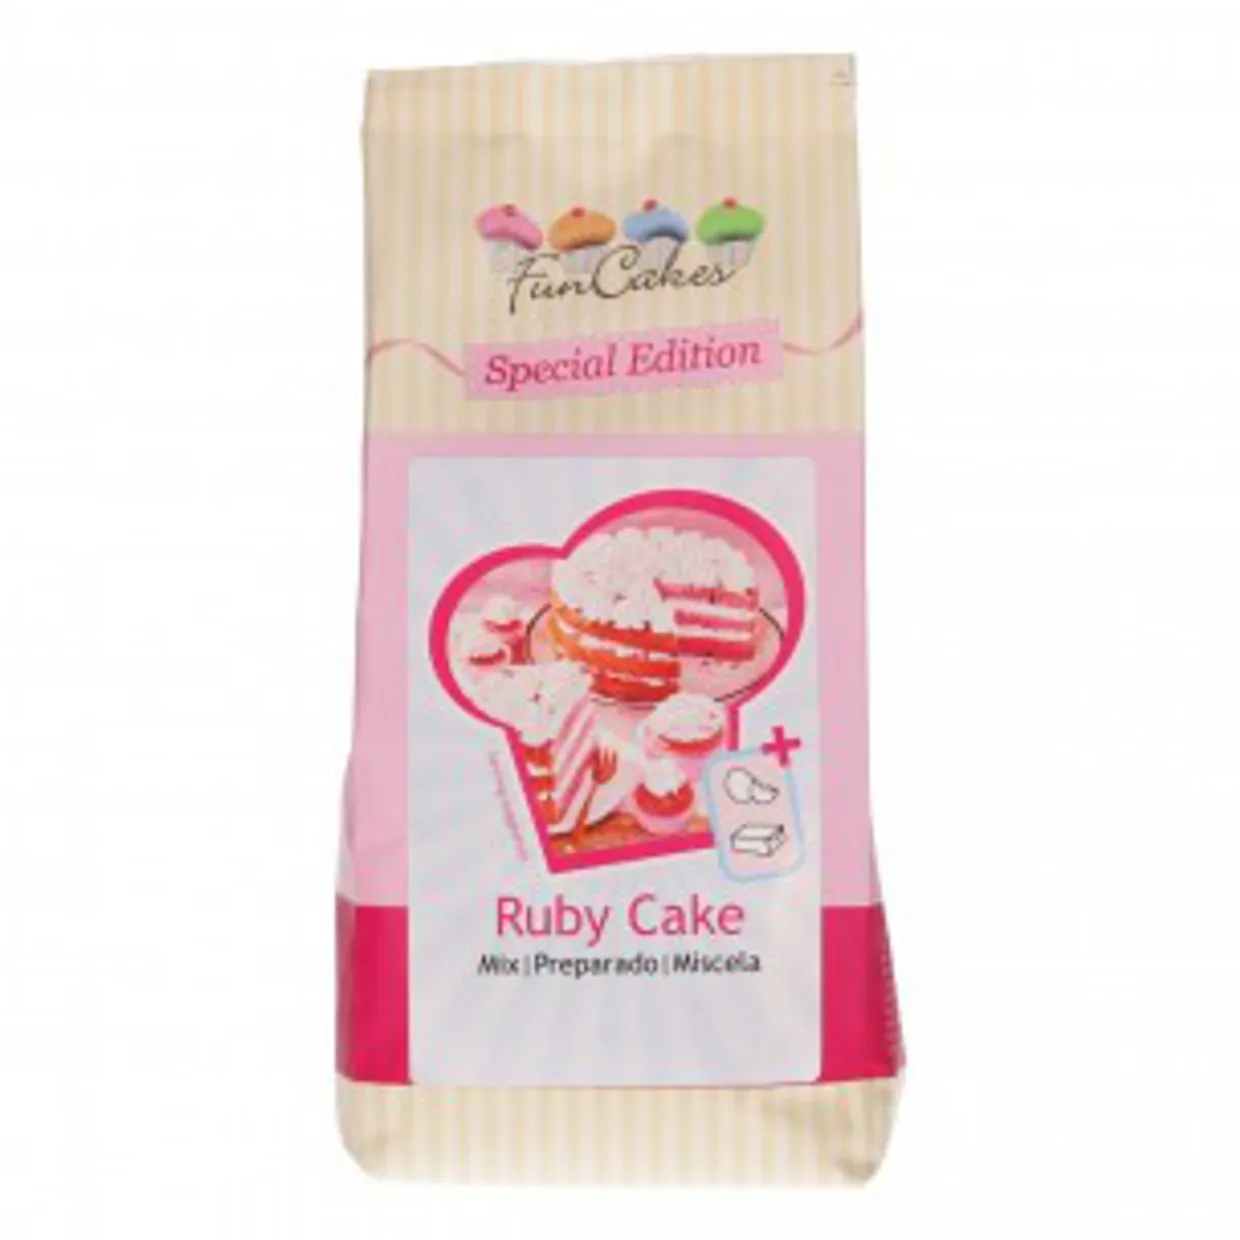 Special Edition Mix voor Ruby Cake 400g